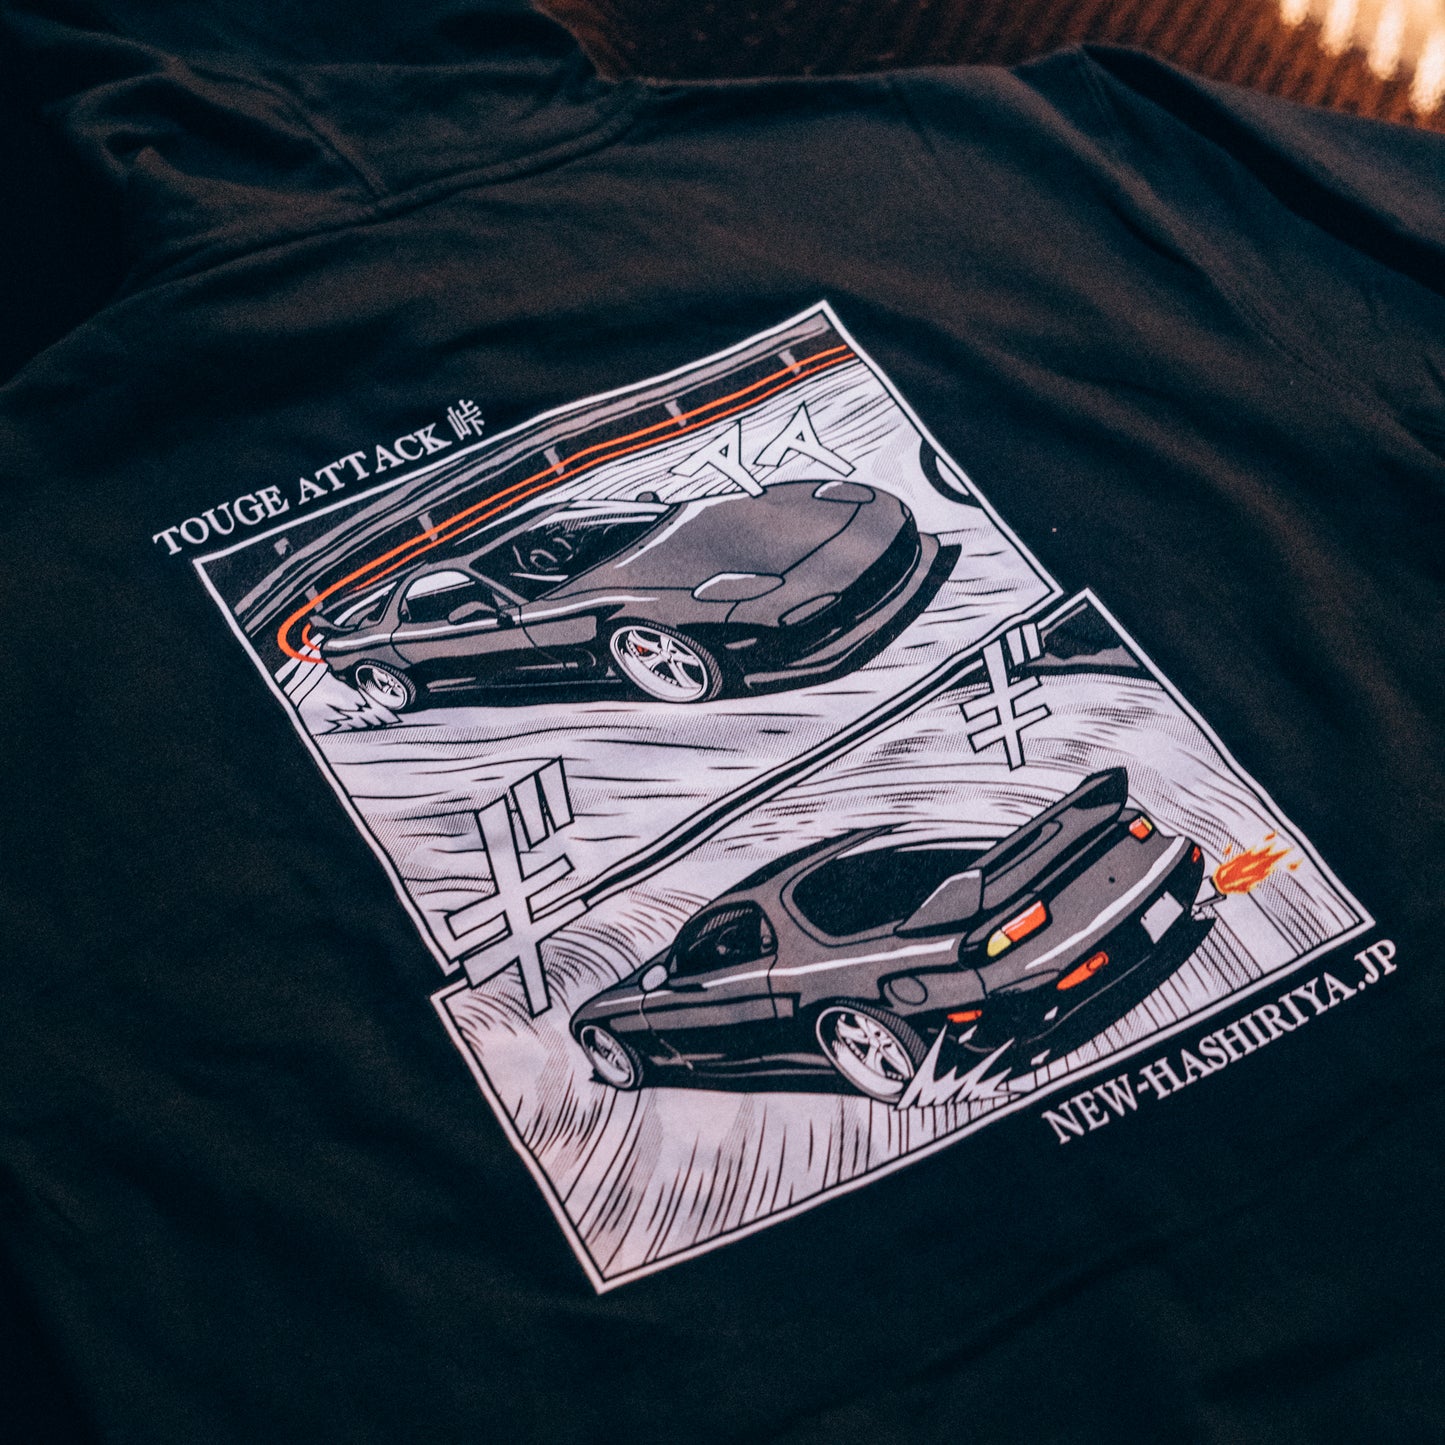 [𝙎𝙊𝙇𝘿 𝙊𝙐𝙏] 'FD Touge Attack' Hoodie